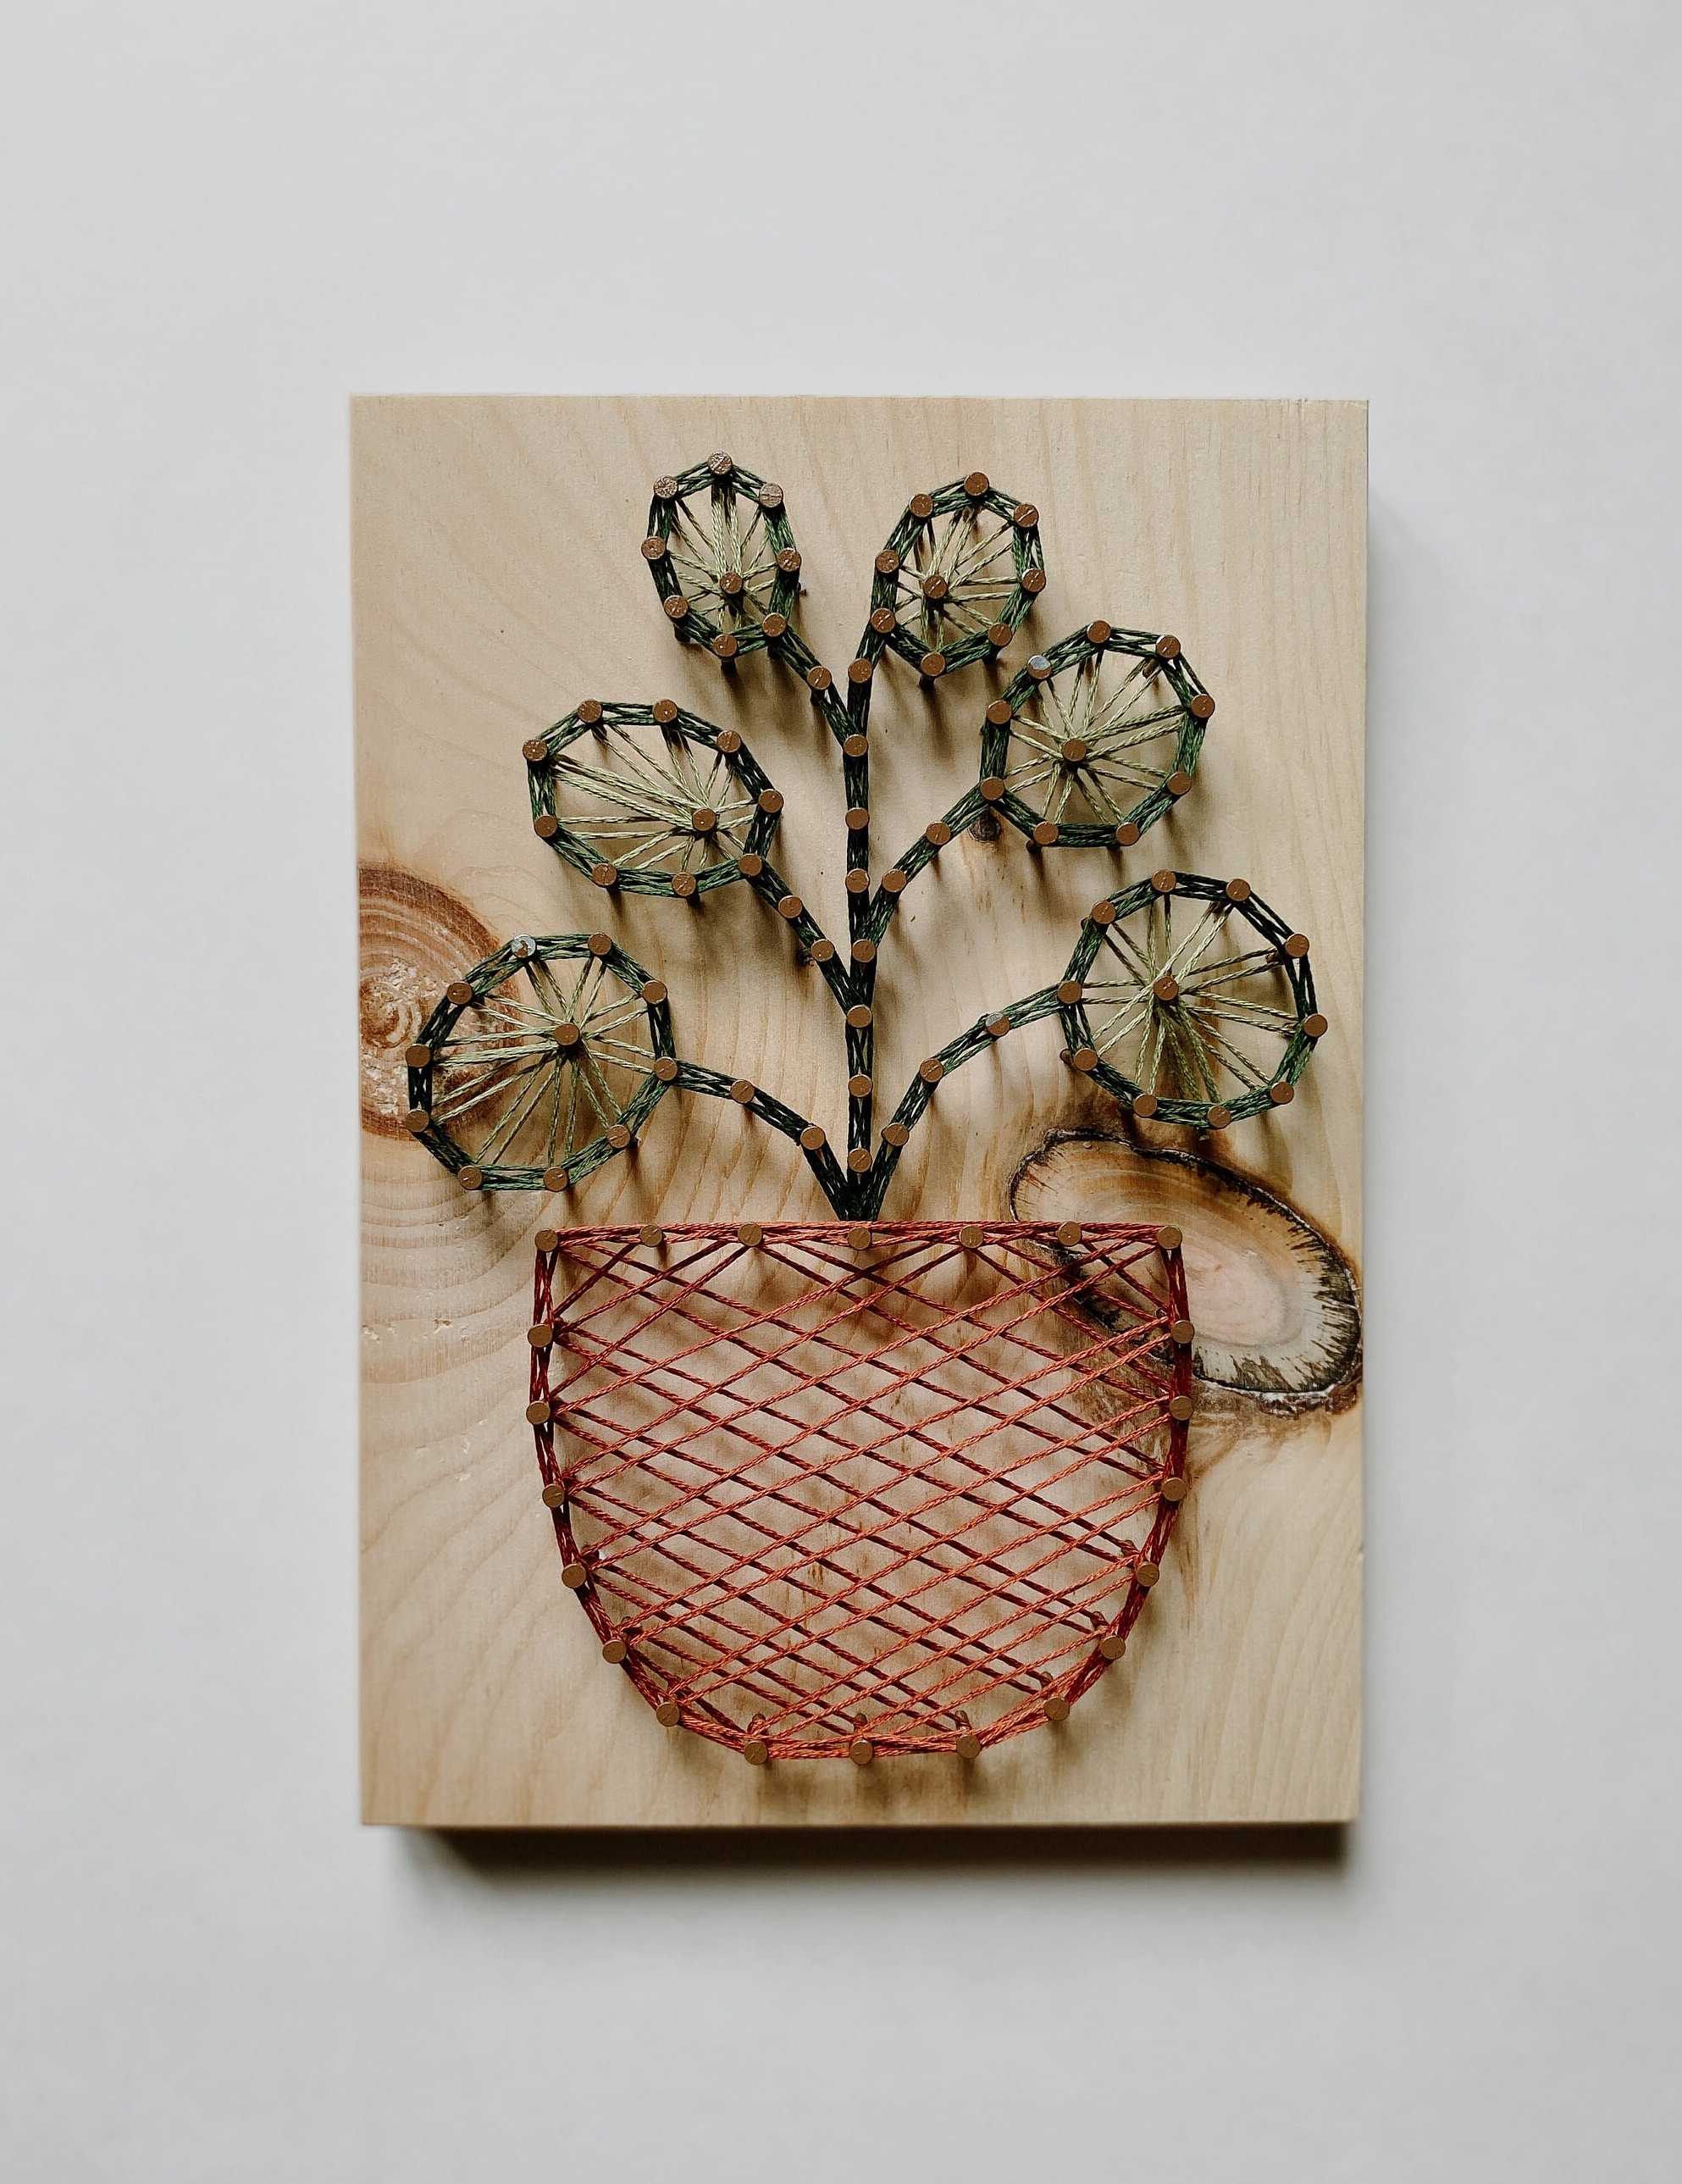 Creative and fun String Art projects